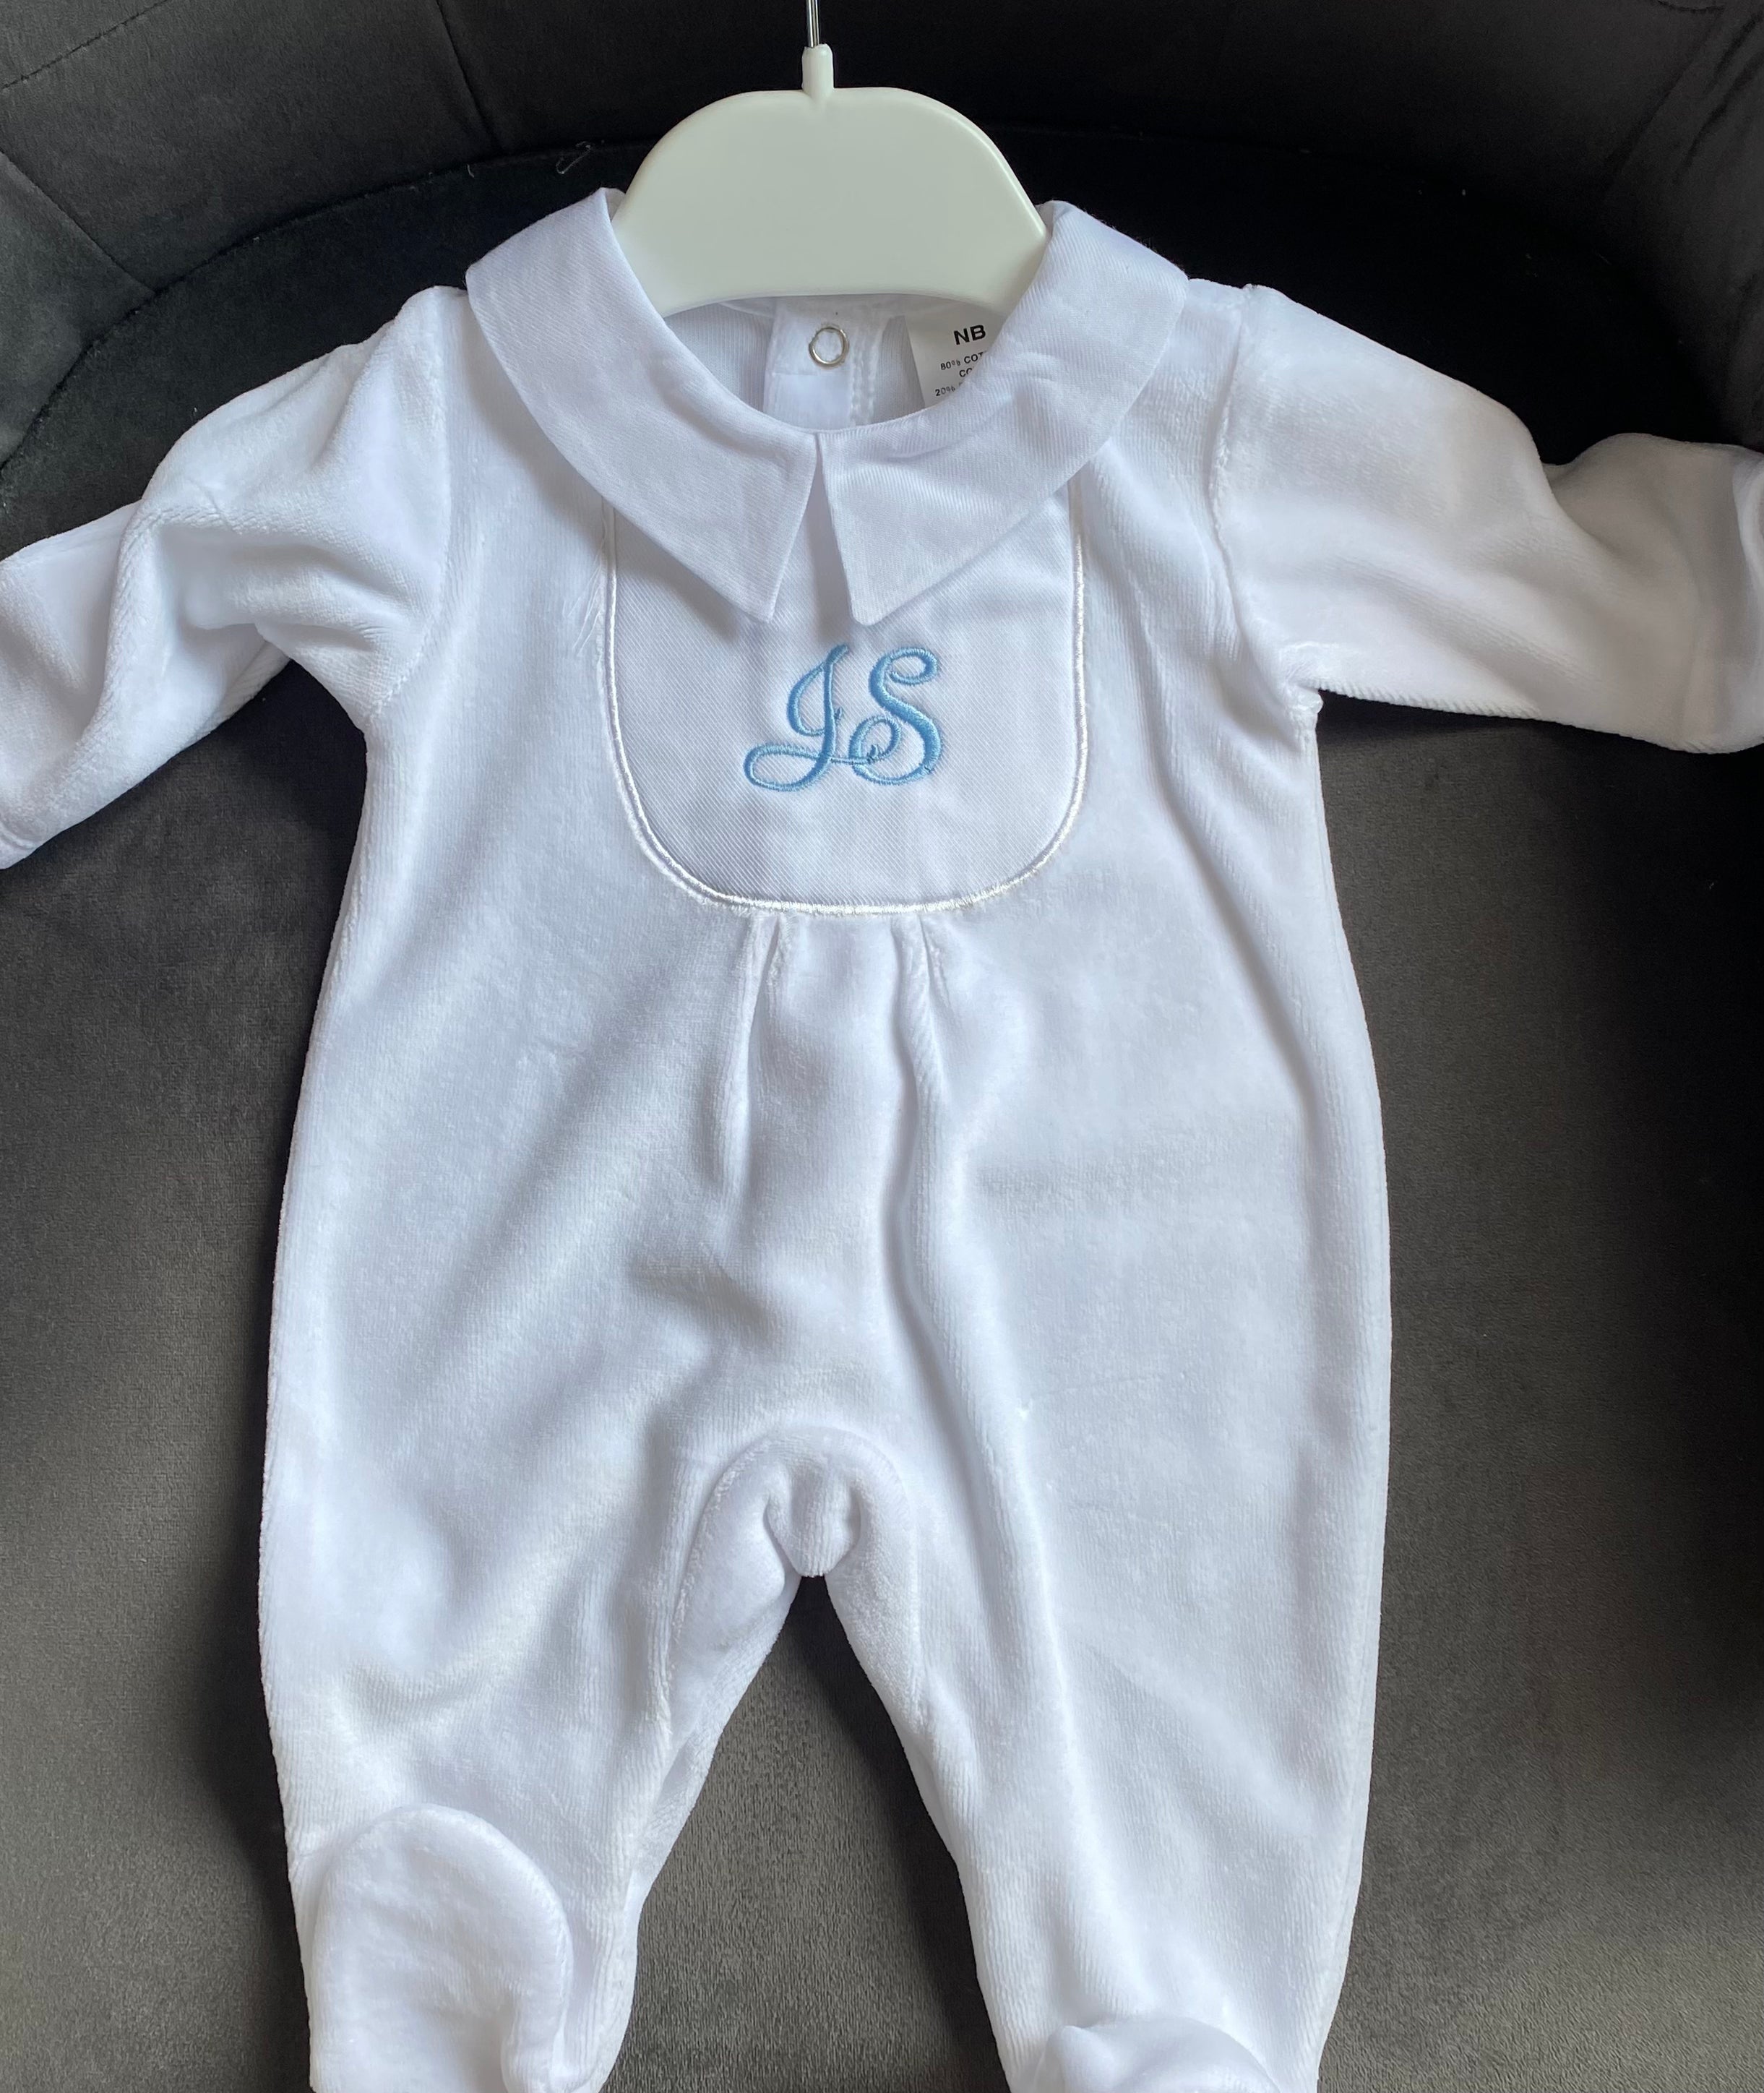 White Velour Babygrow with Initials JS